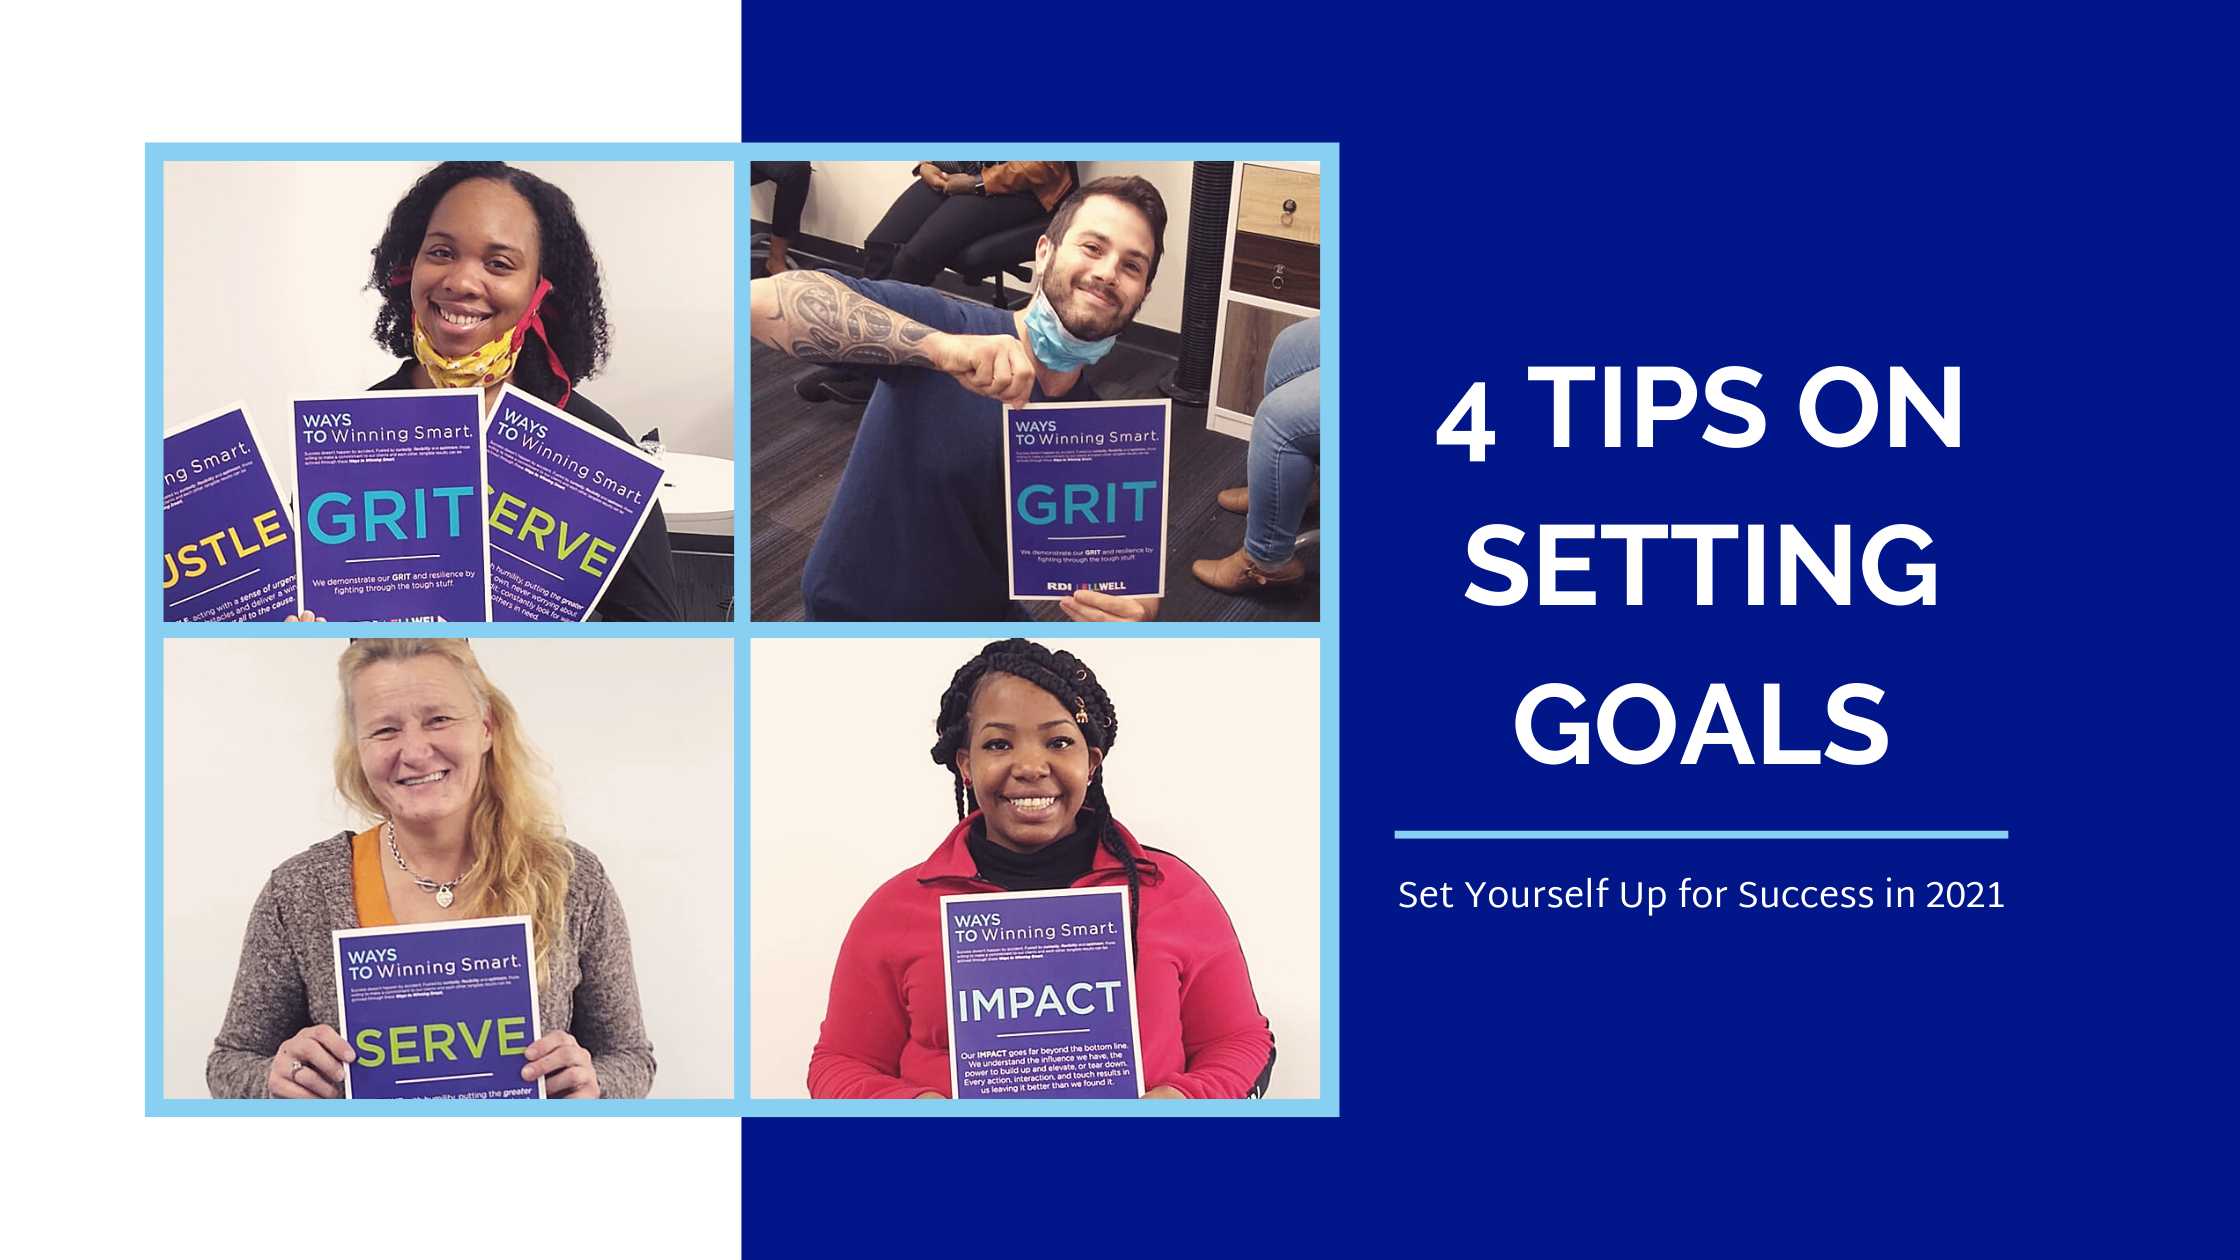 4 Tips on Goal Setting - set yourself up for success in 2021